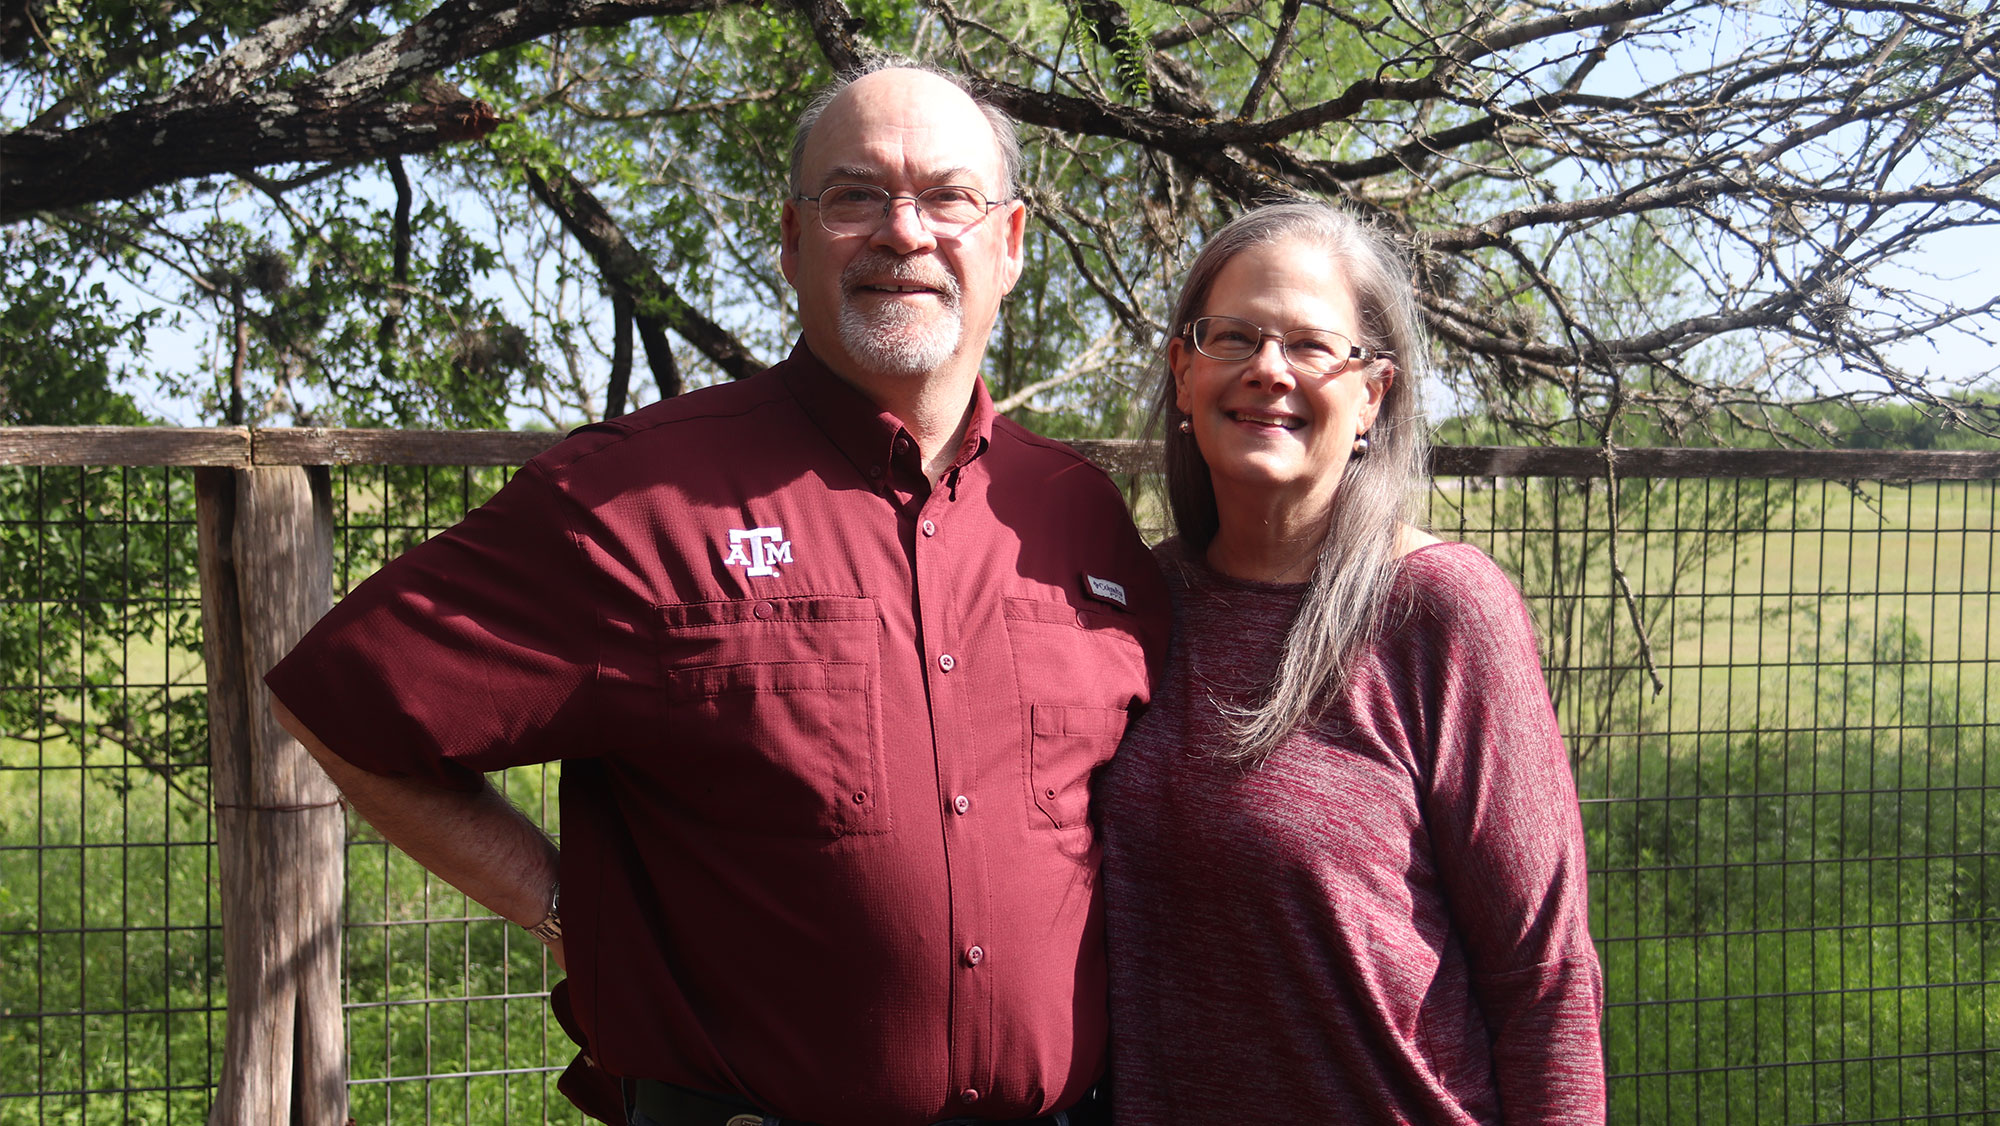 Keith and Lee Coleman stand outside in front of a tree and fenced pasture.